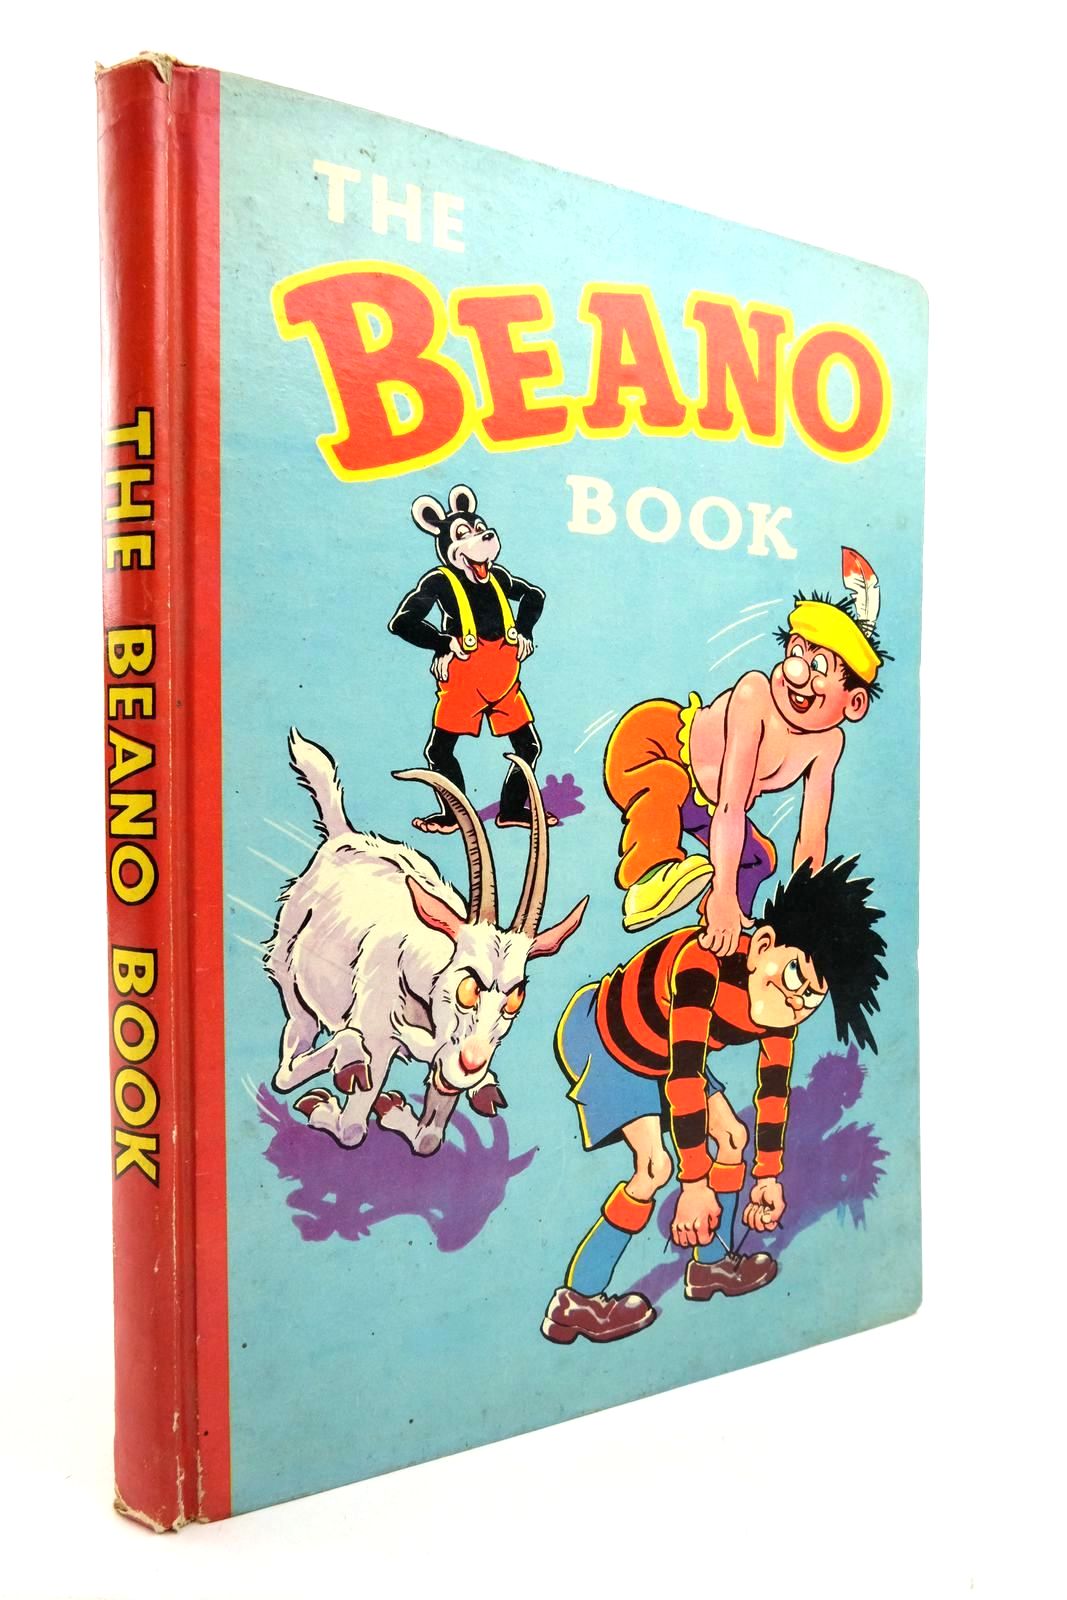 Photo of THE BEANO BOOK 1959- Stock Number: 2137506